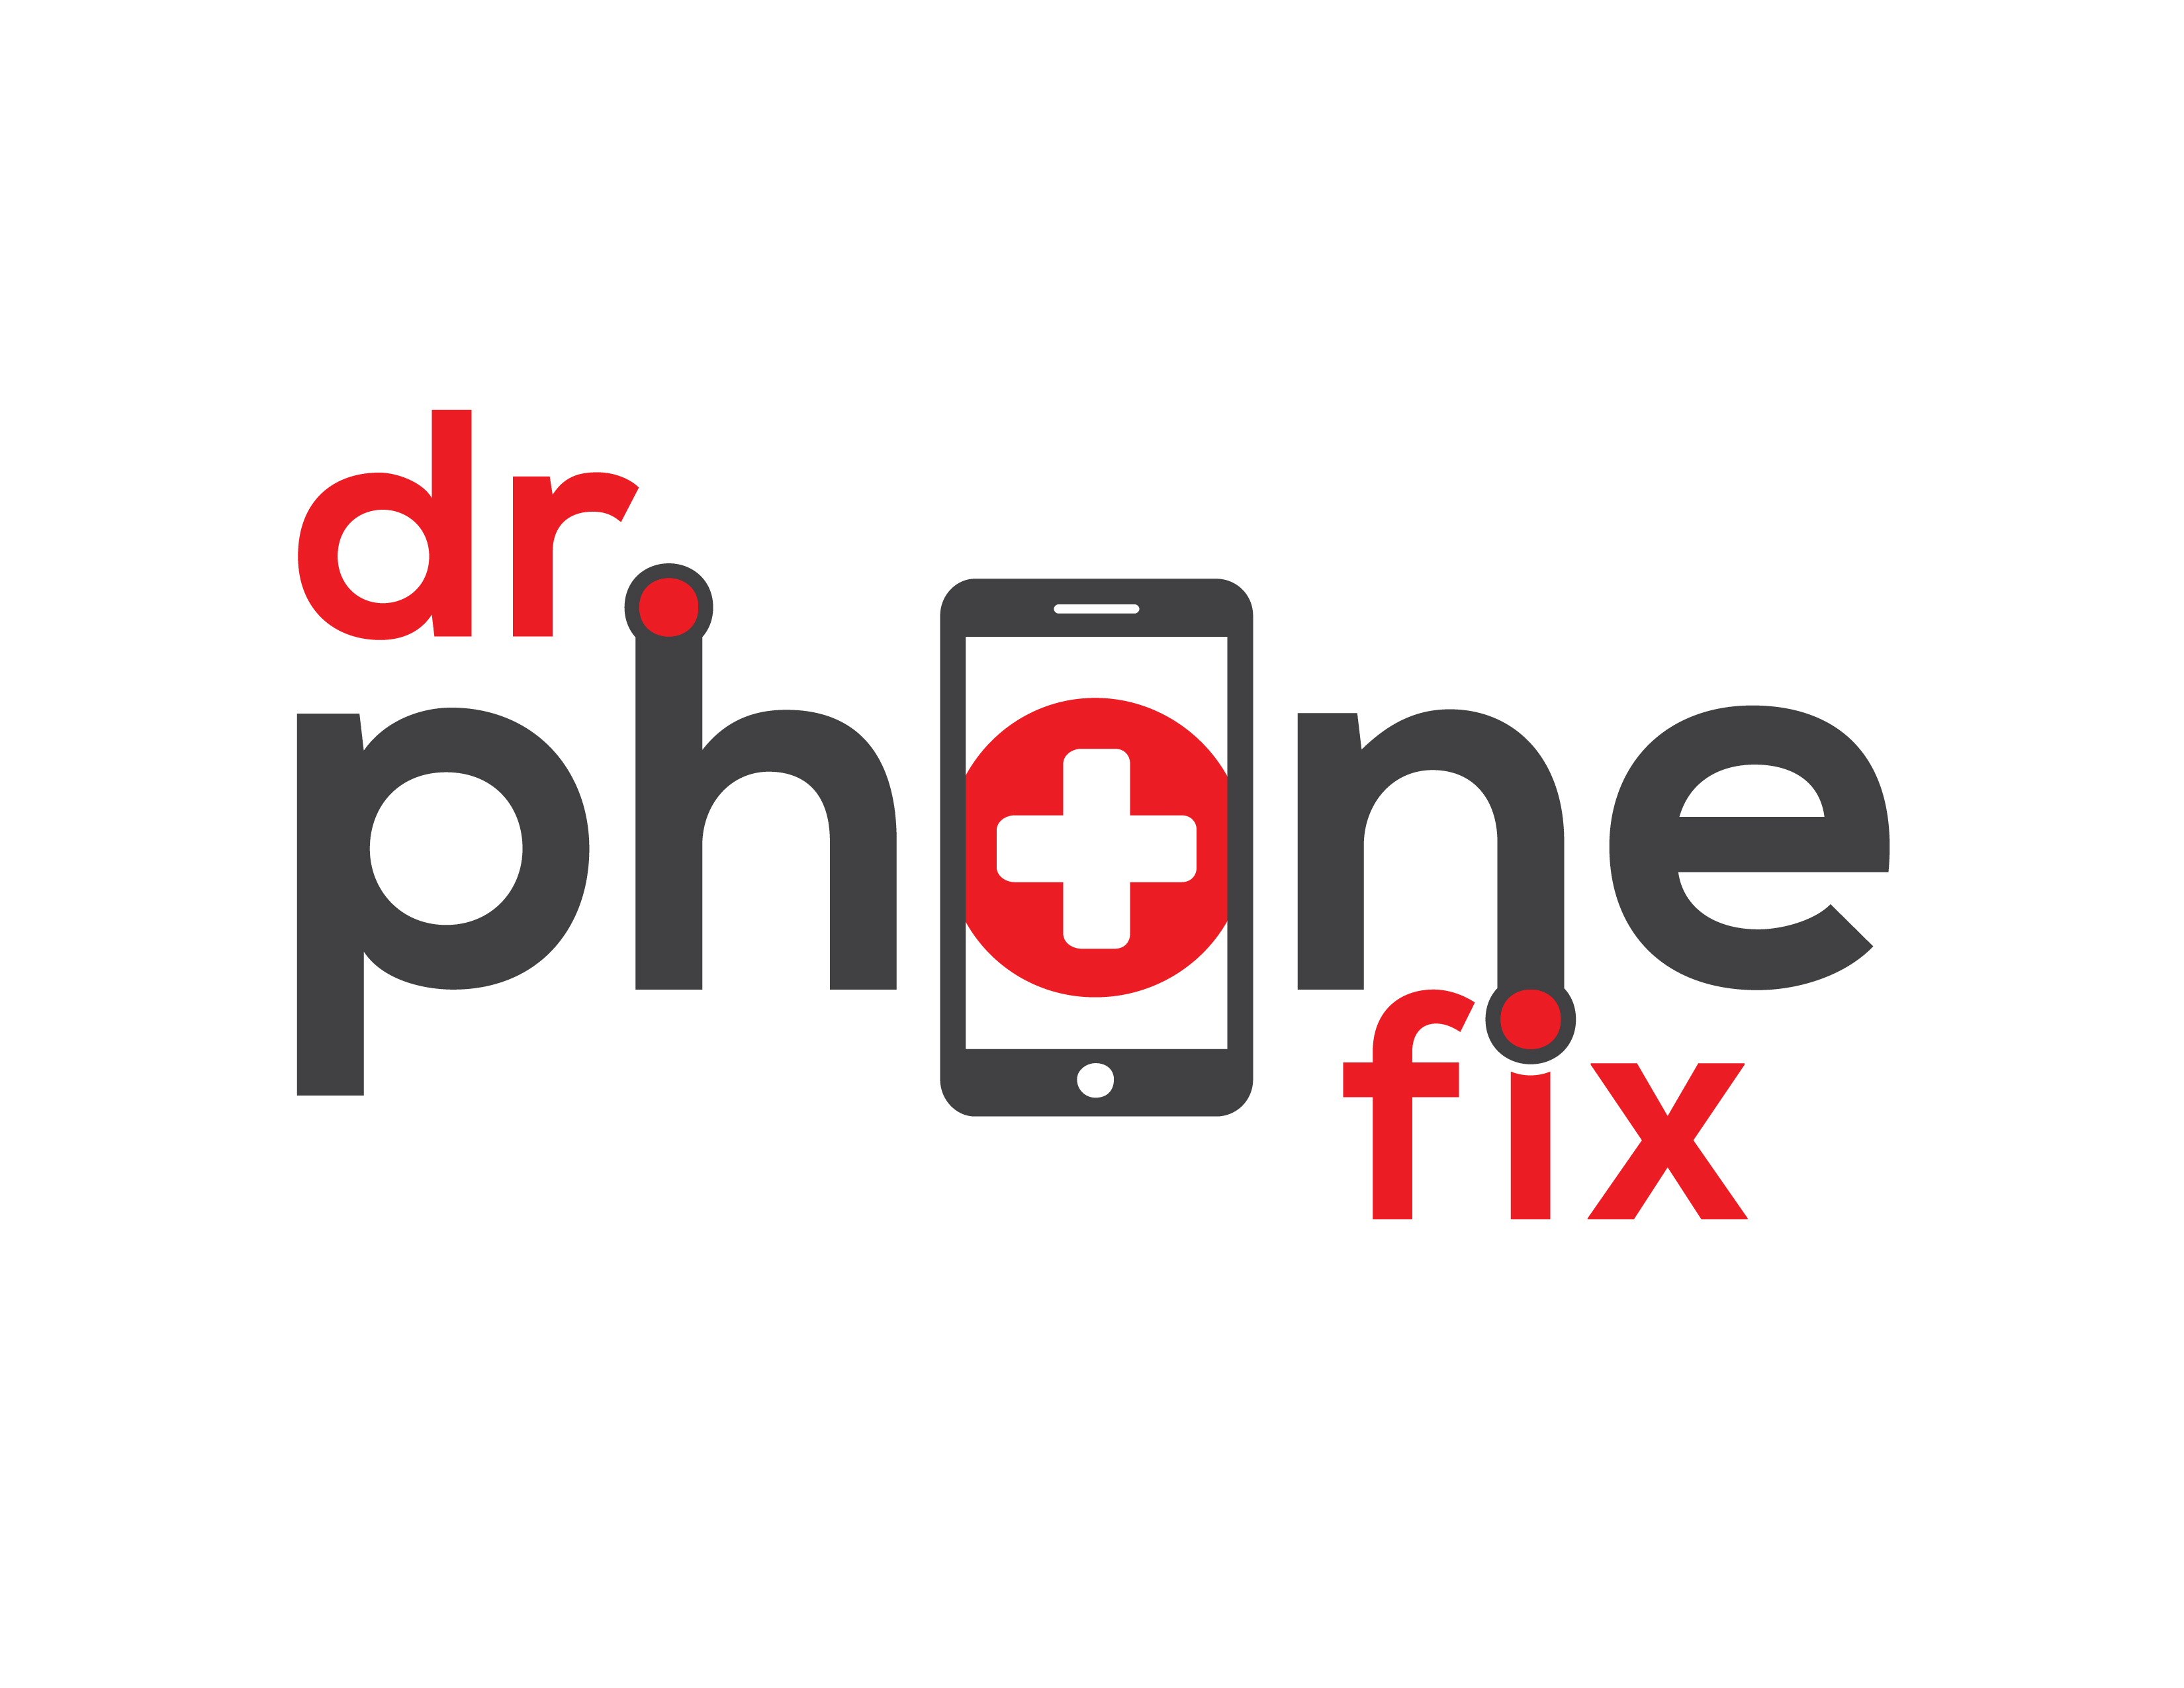 SASKATOON BUSINESS LEADER JOINS IN GRAND OPENING OF TWO DR. PHONE FIX STORES